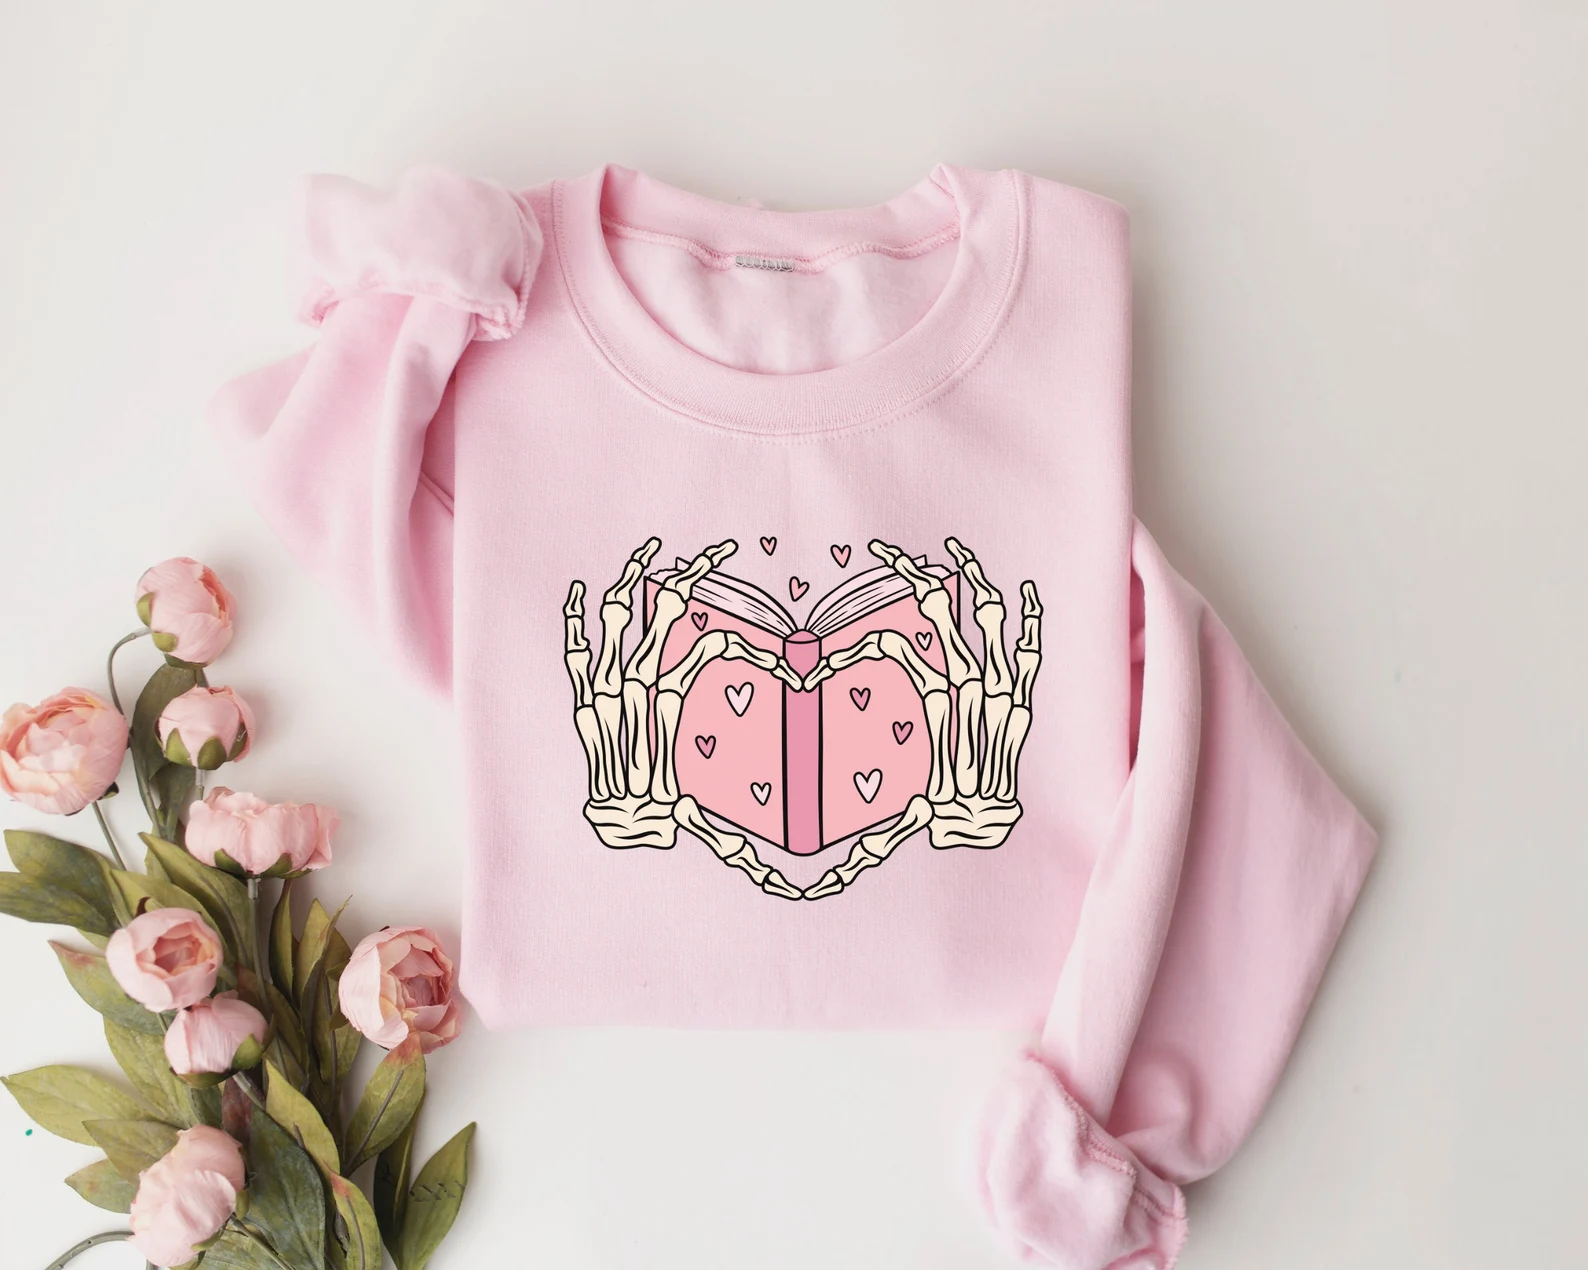 Image of a pink sweatshirt with a heart shape made by two skeleton hands. Between the hands is a book. 